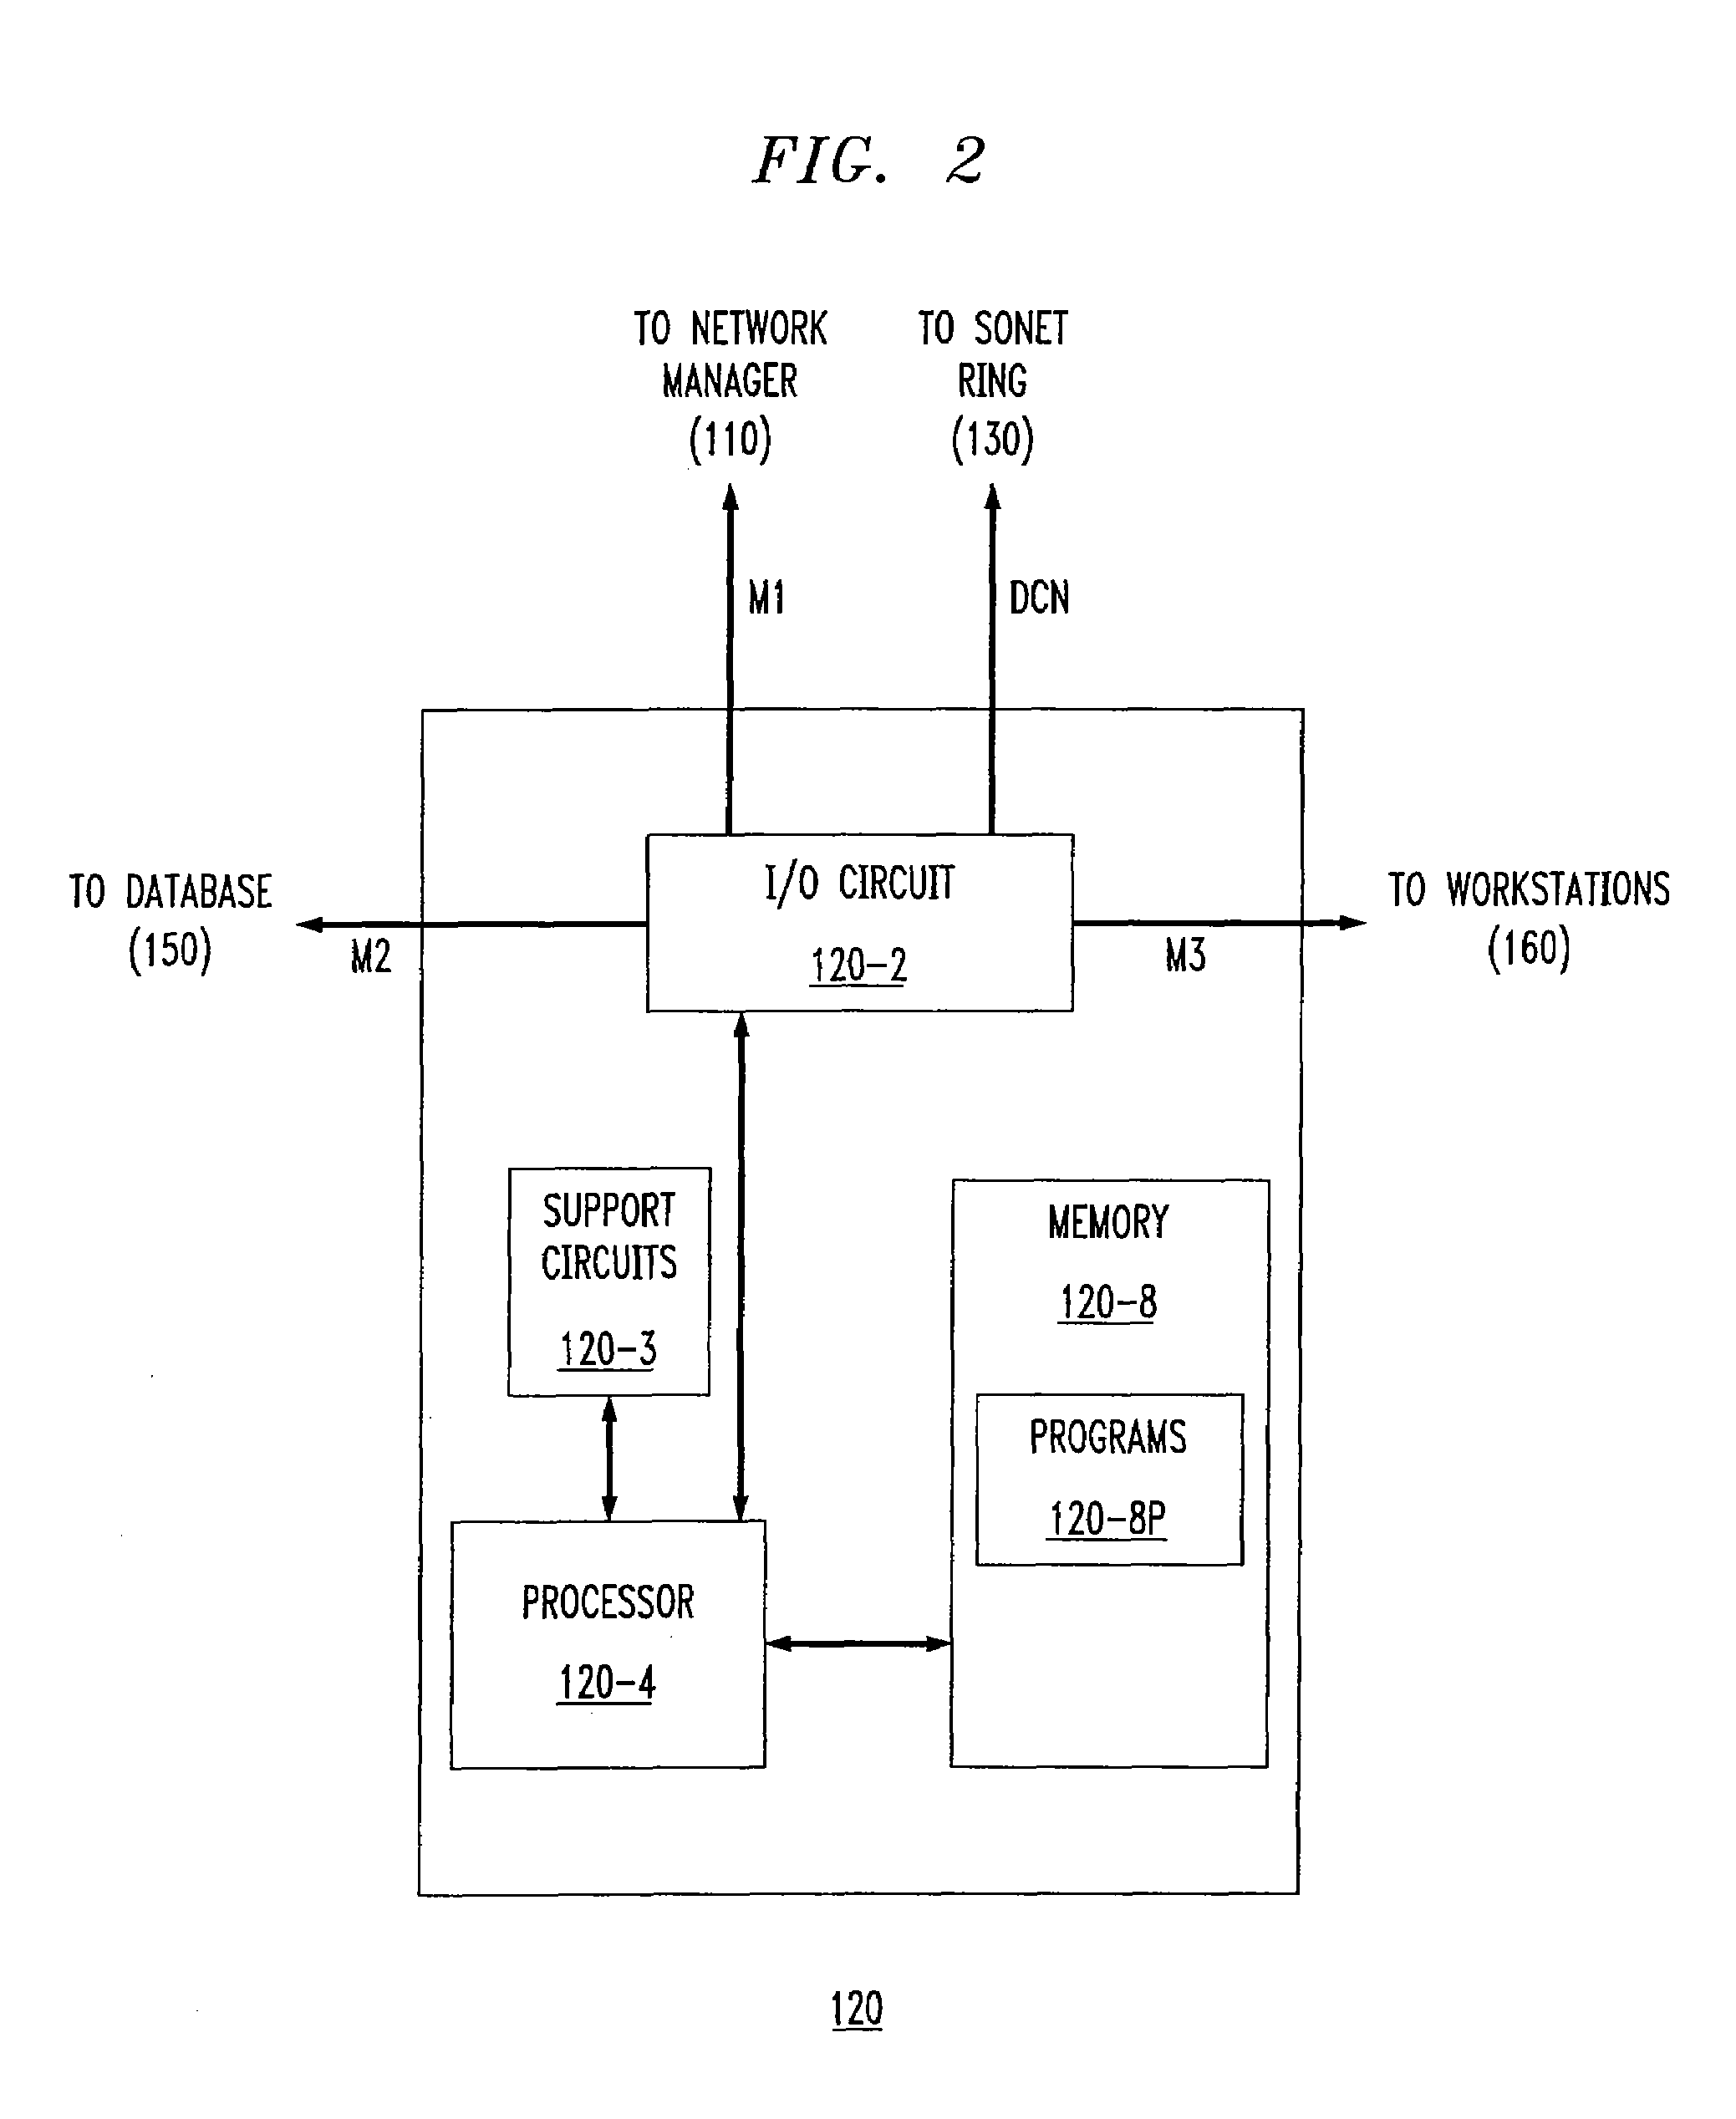 Method and apparatus for SONET/SDH ring load balancing